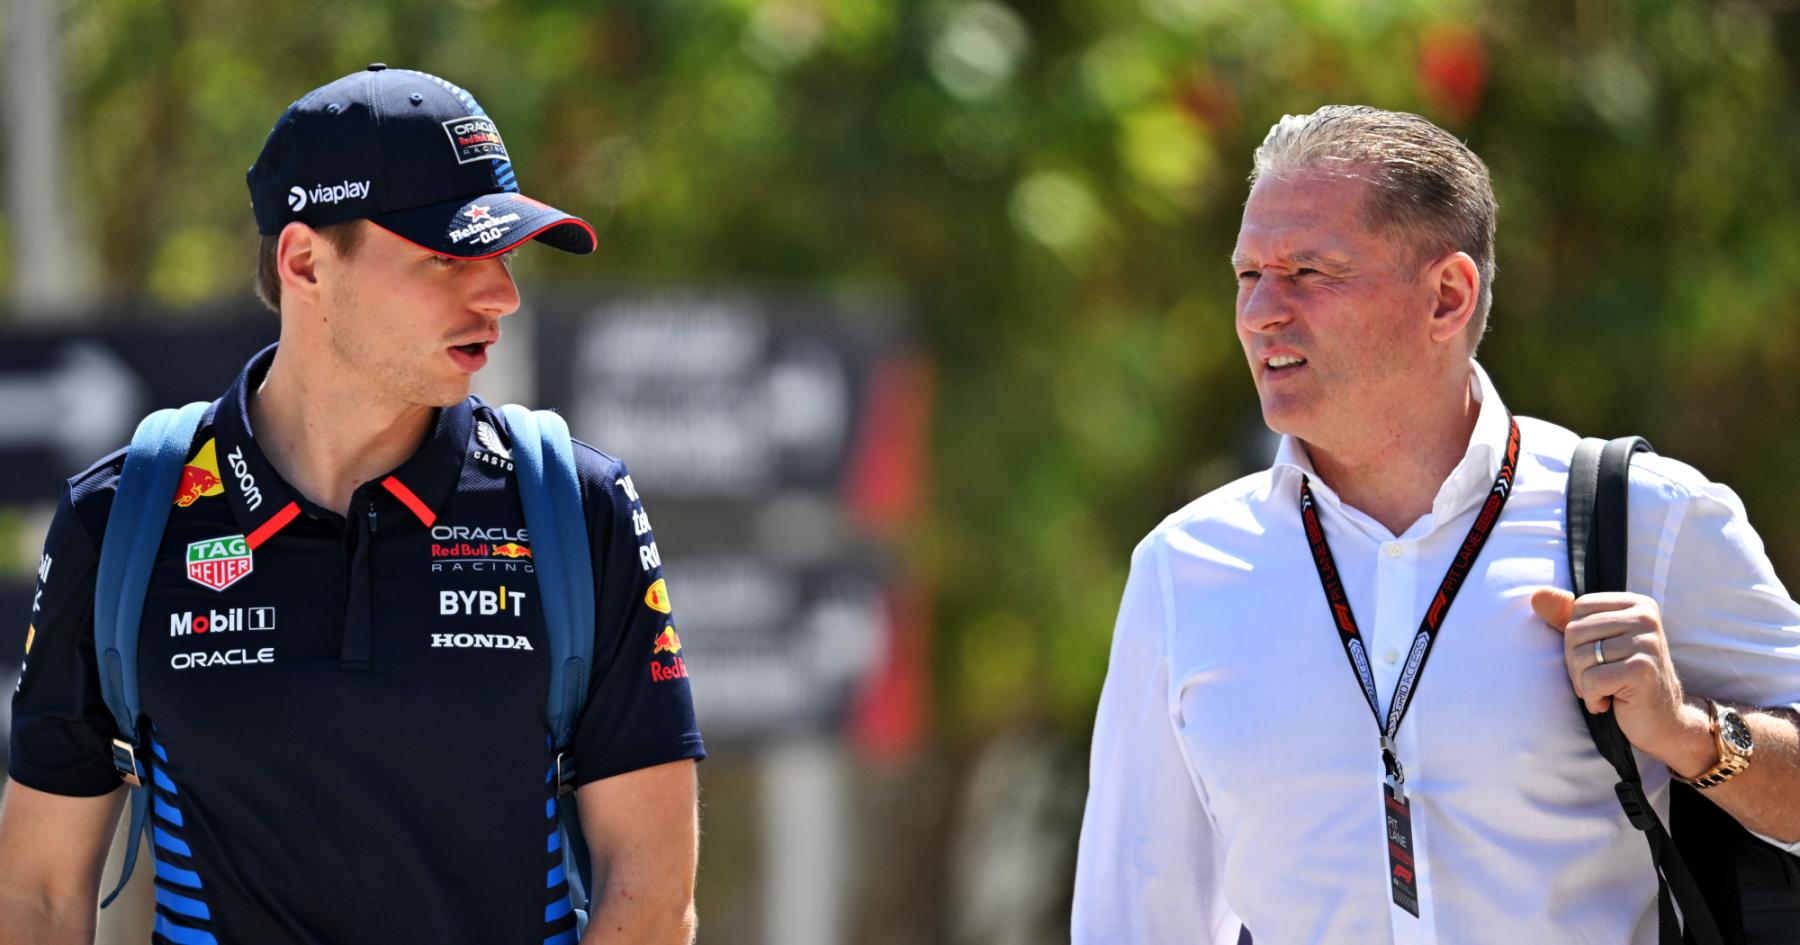 Verstappen and Horner Clash: The Storm Continues